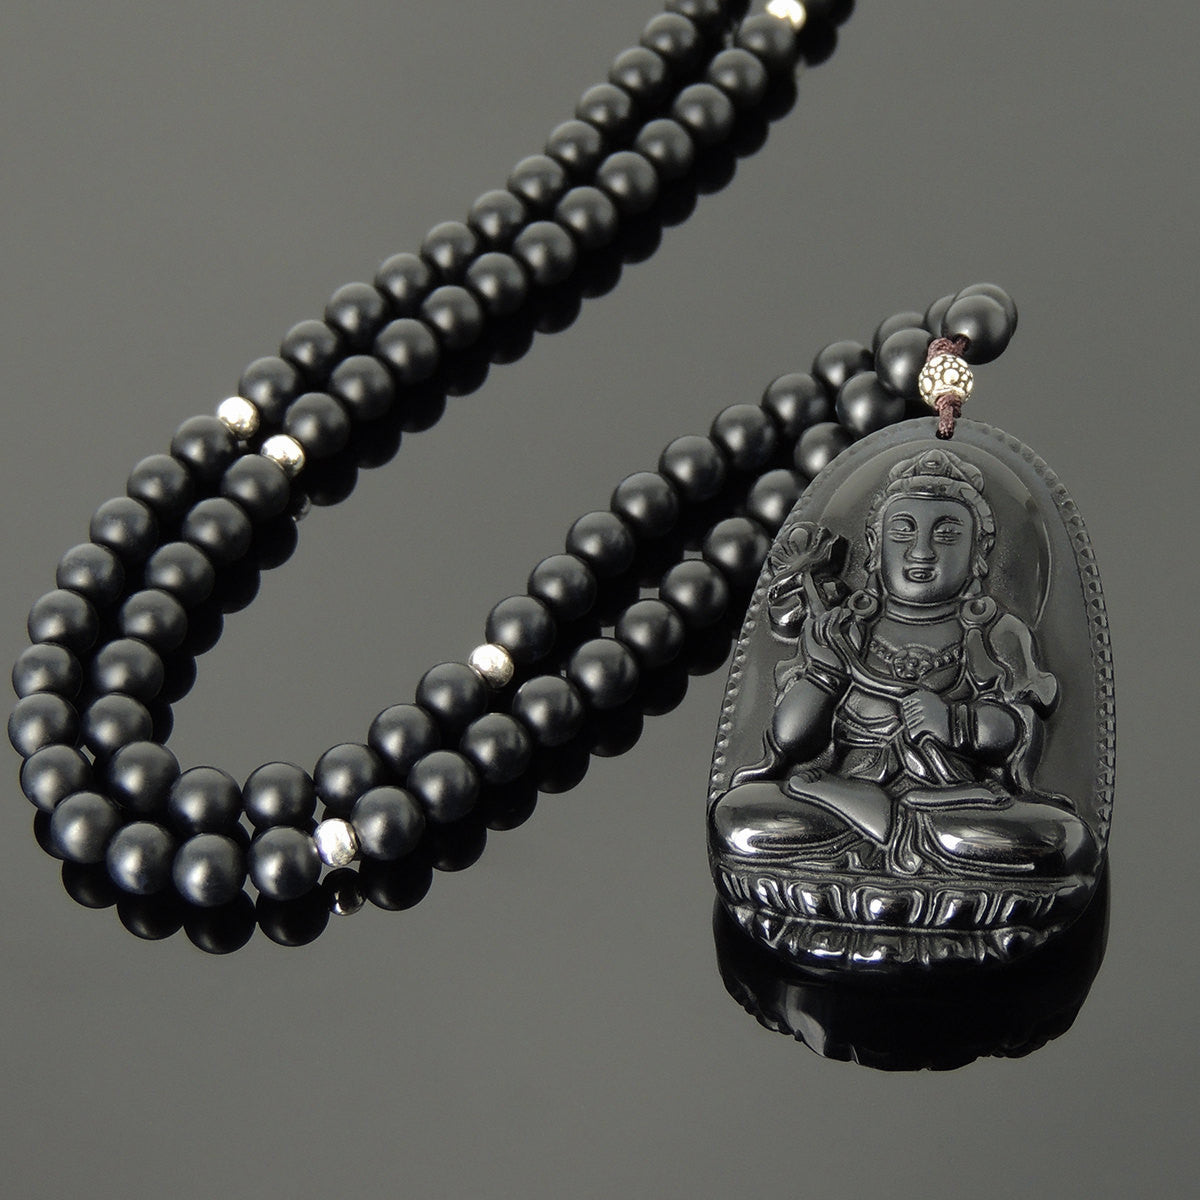 Matte Black Onyx & Black Obsidian Guanyin Buddha Pendant Adjustable Braided Necklace with S925 Sterling Silver Spacer Beads - Handmade by Gem & Silver NK176